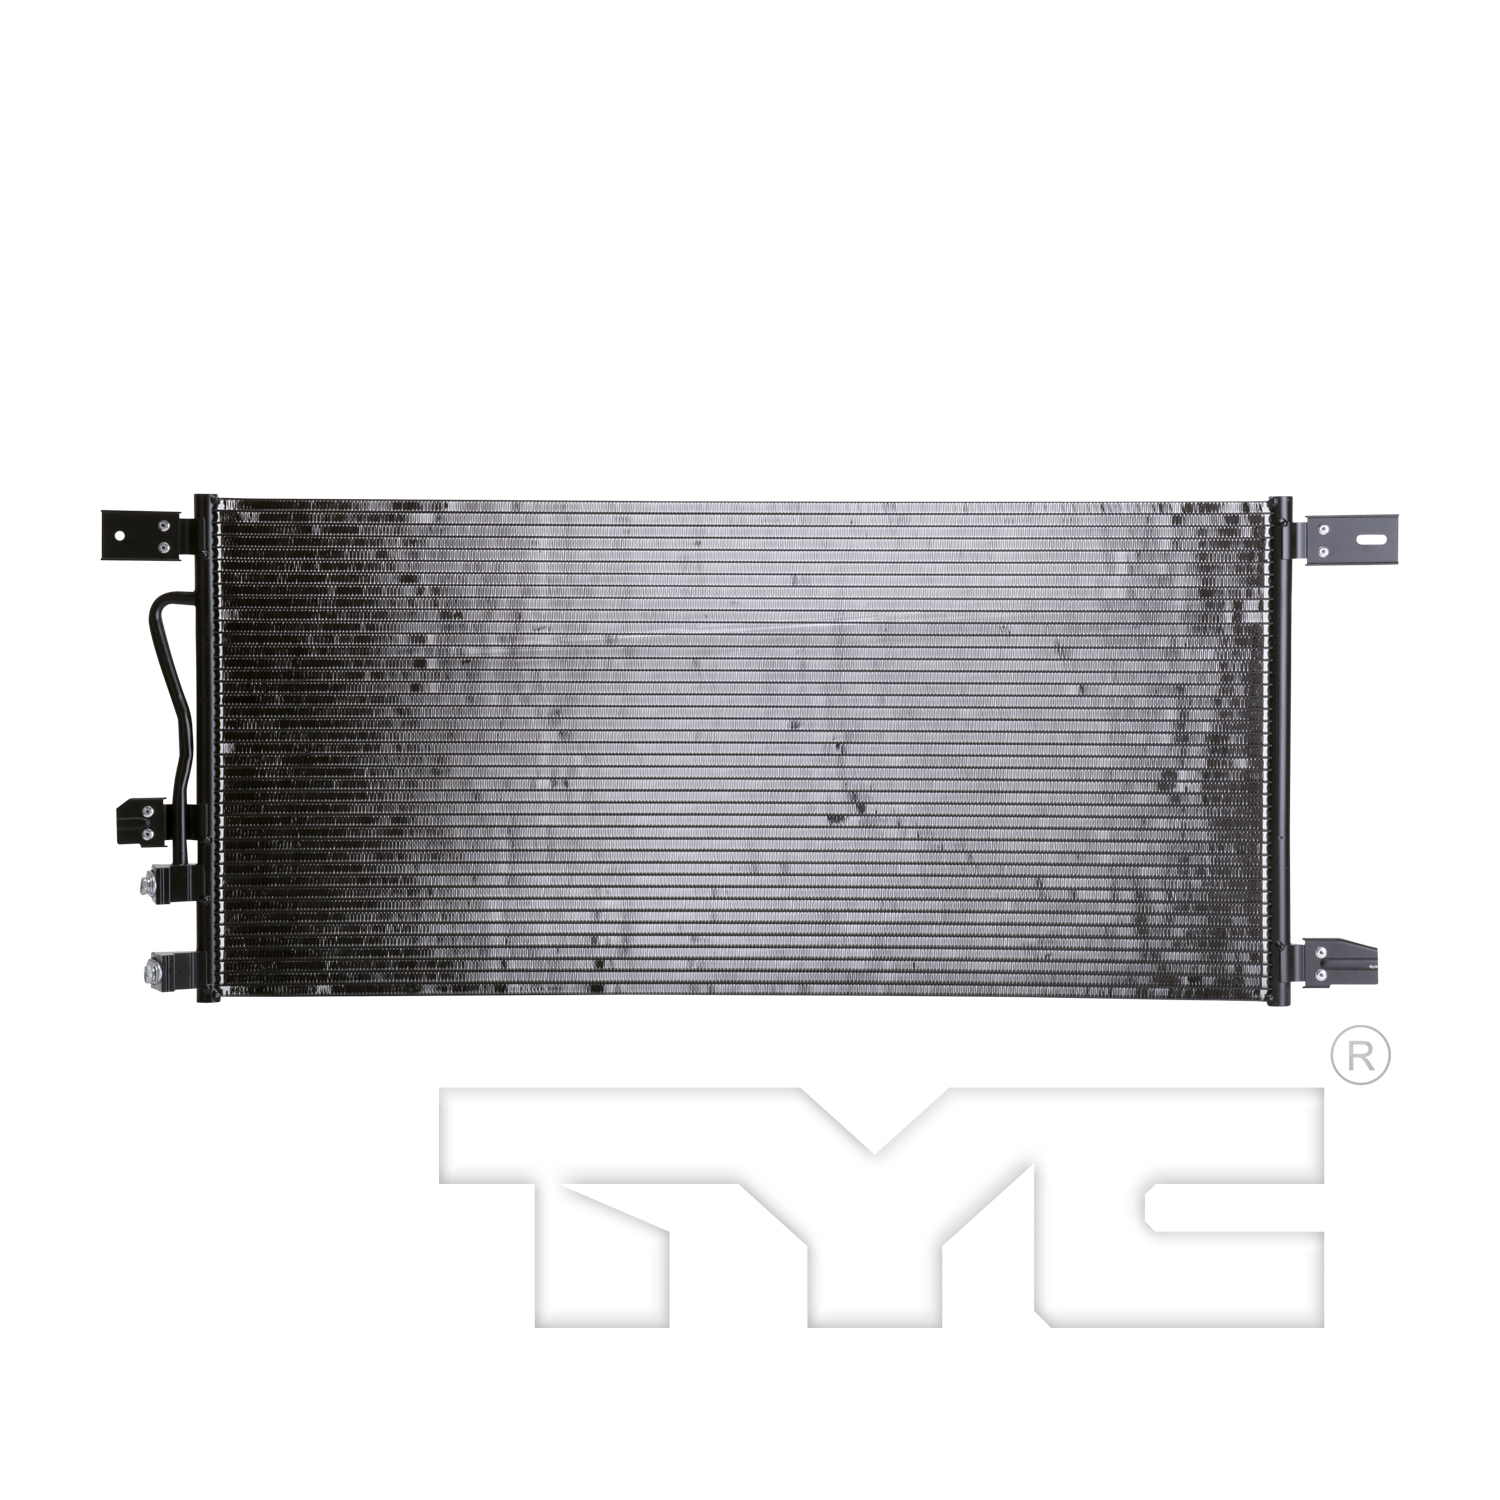 Aftermarket AC CONDENSERS for FORD - F-250 SUPER DUTY, F-250 SUPER DUTY,08-10,Air conditioning condenser